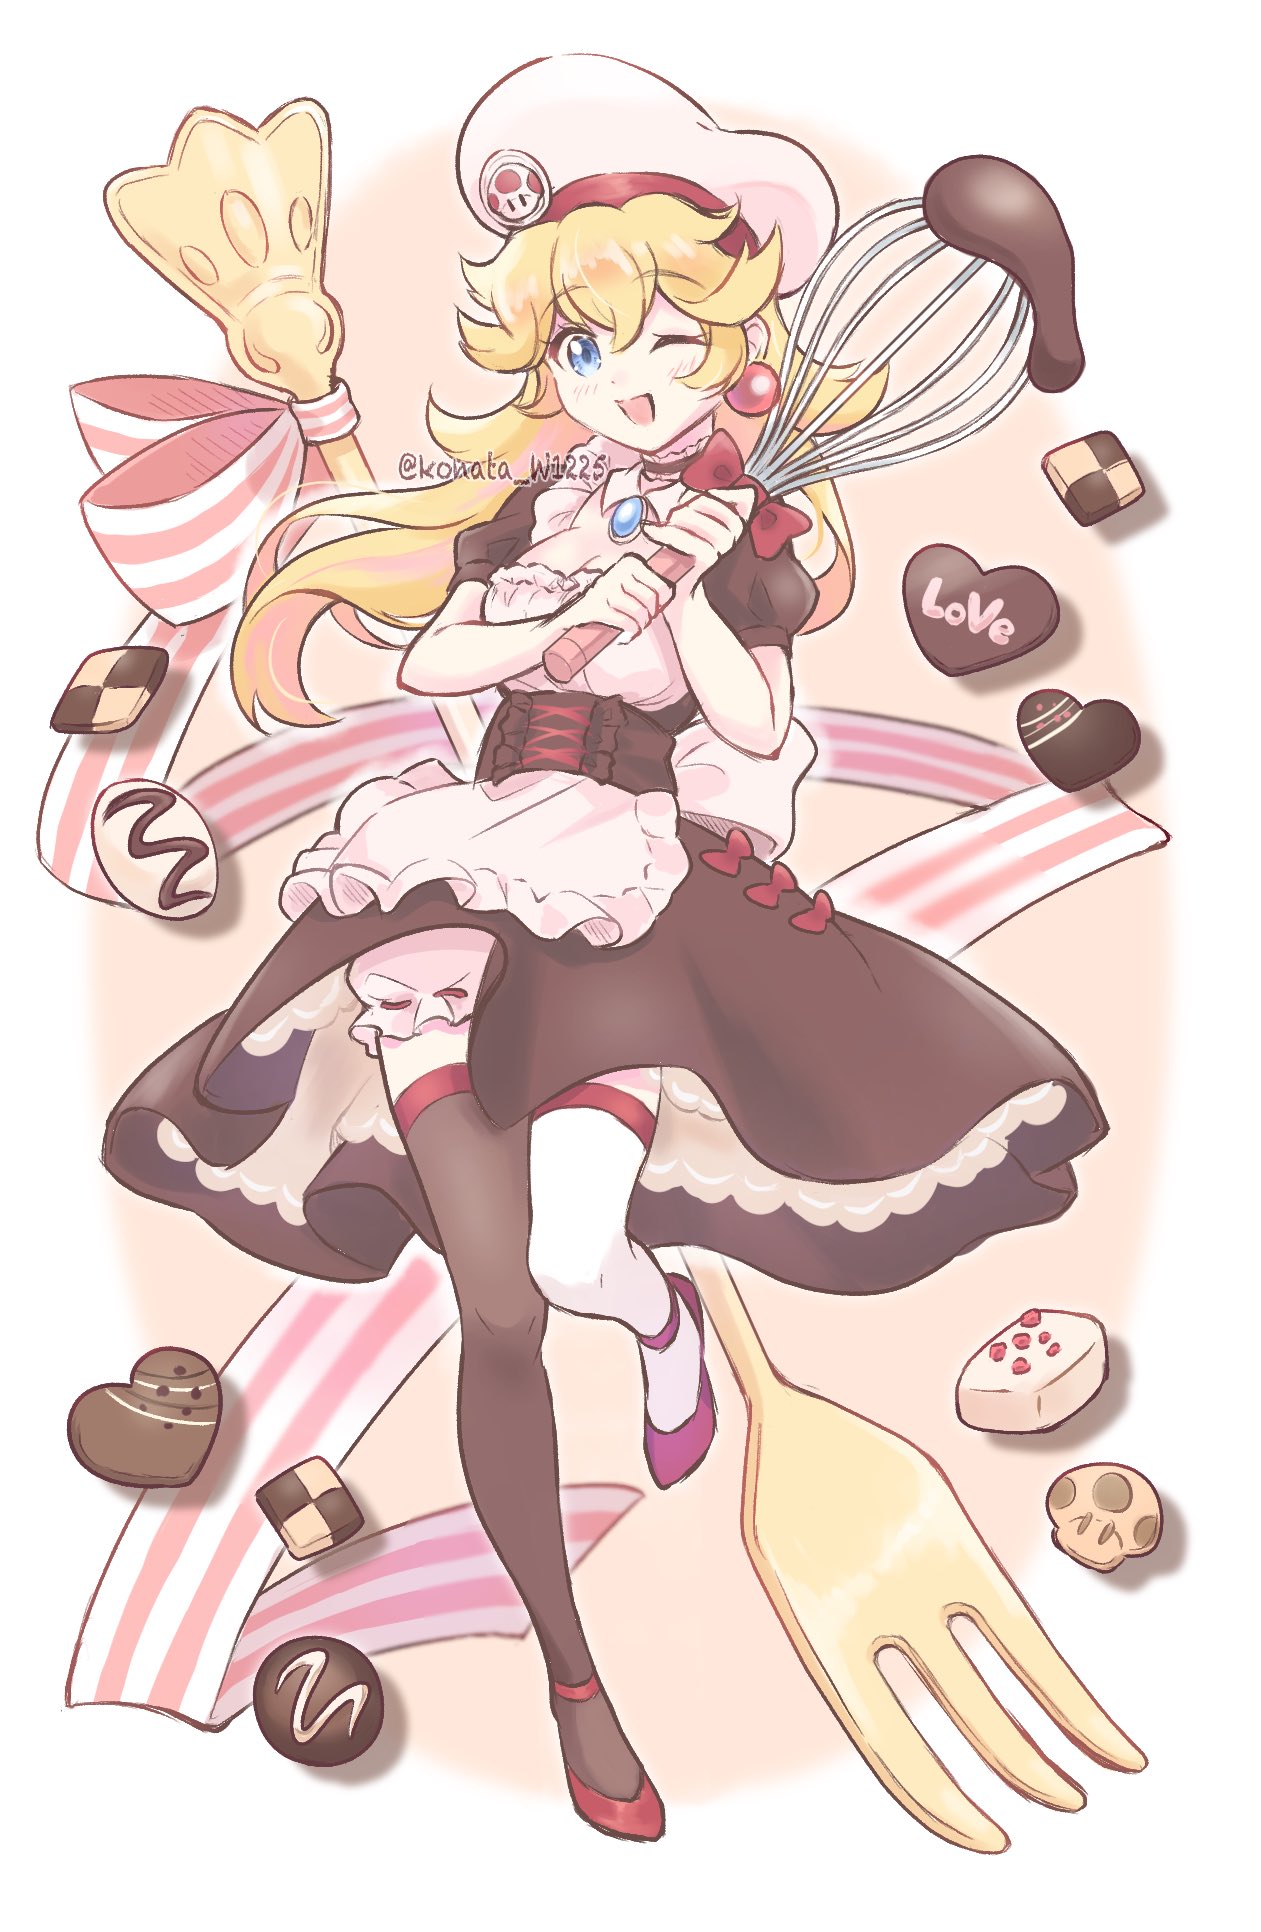 1girl asymmetrical_legwear bakery blonde_hair blue_eyes chef_hat chocolate cookie food fork hat highres holding holding_whisk konata_w1225 looking_at_viewer mismatched_legwear one_eye_closed open_mouth princess_peach shop super_mario_bros. thigh-highs whisk